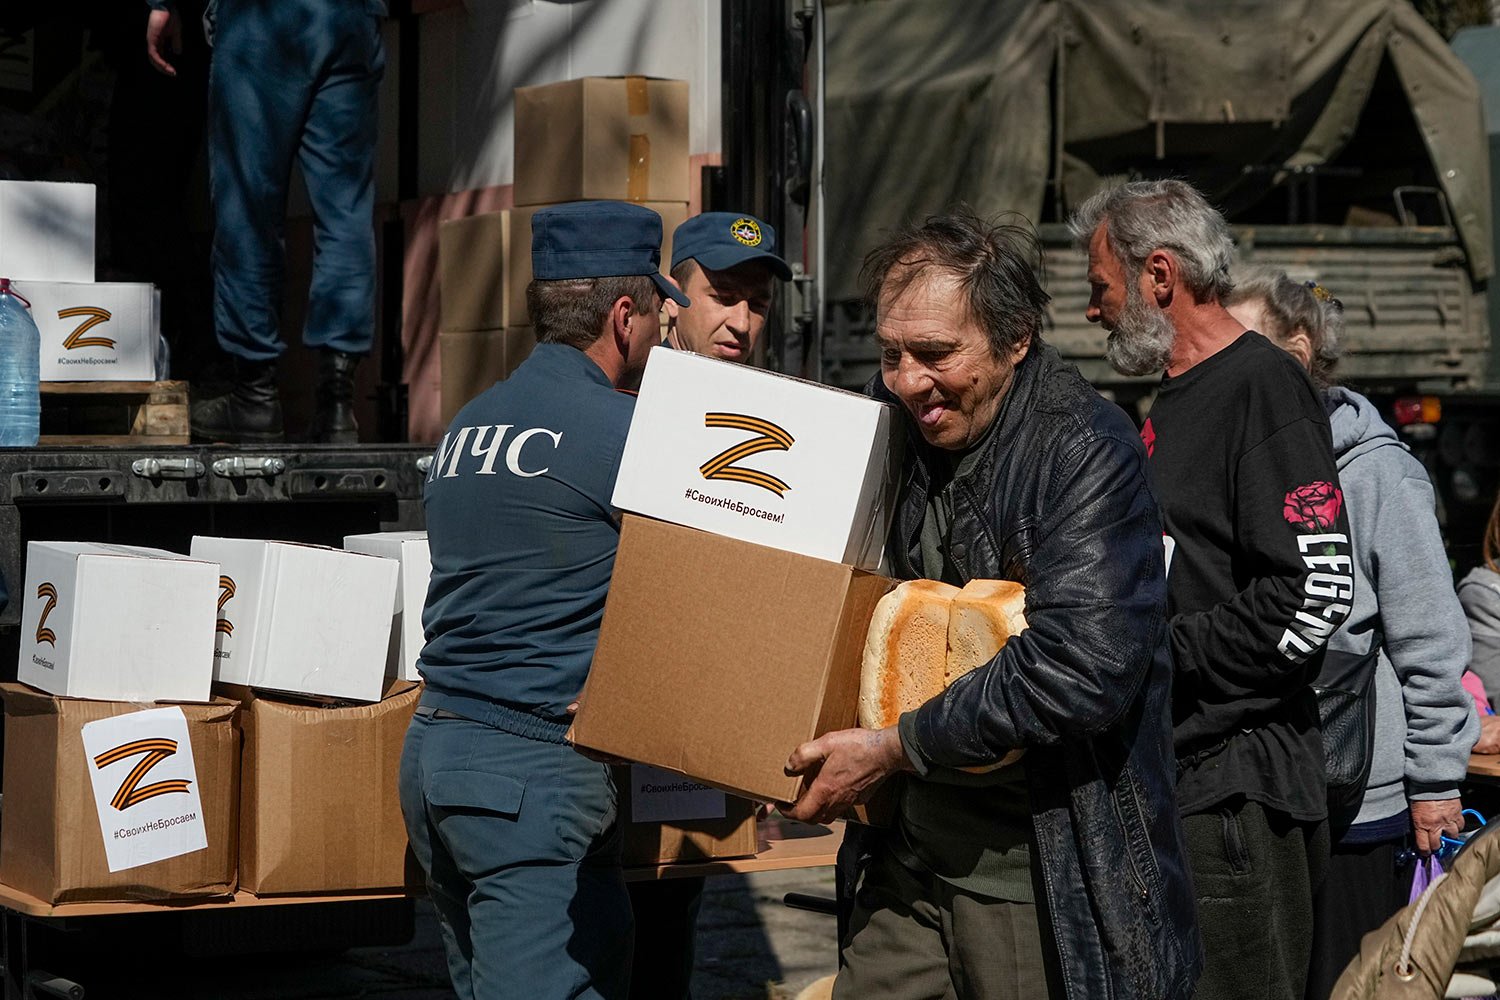  A man carries bread and boxes with the letter Z, which has become a symbol of the Russian military, and a hashtag reading "We don't abandon our own", as other local civilians gather to get humanitarian aid, bread and water distributed by Donetsk Peo